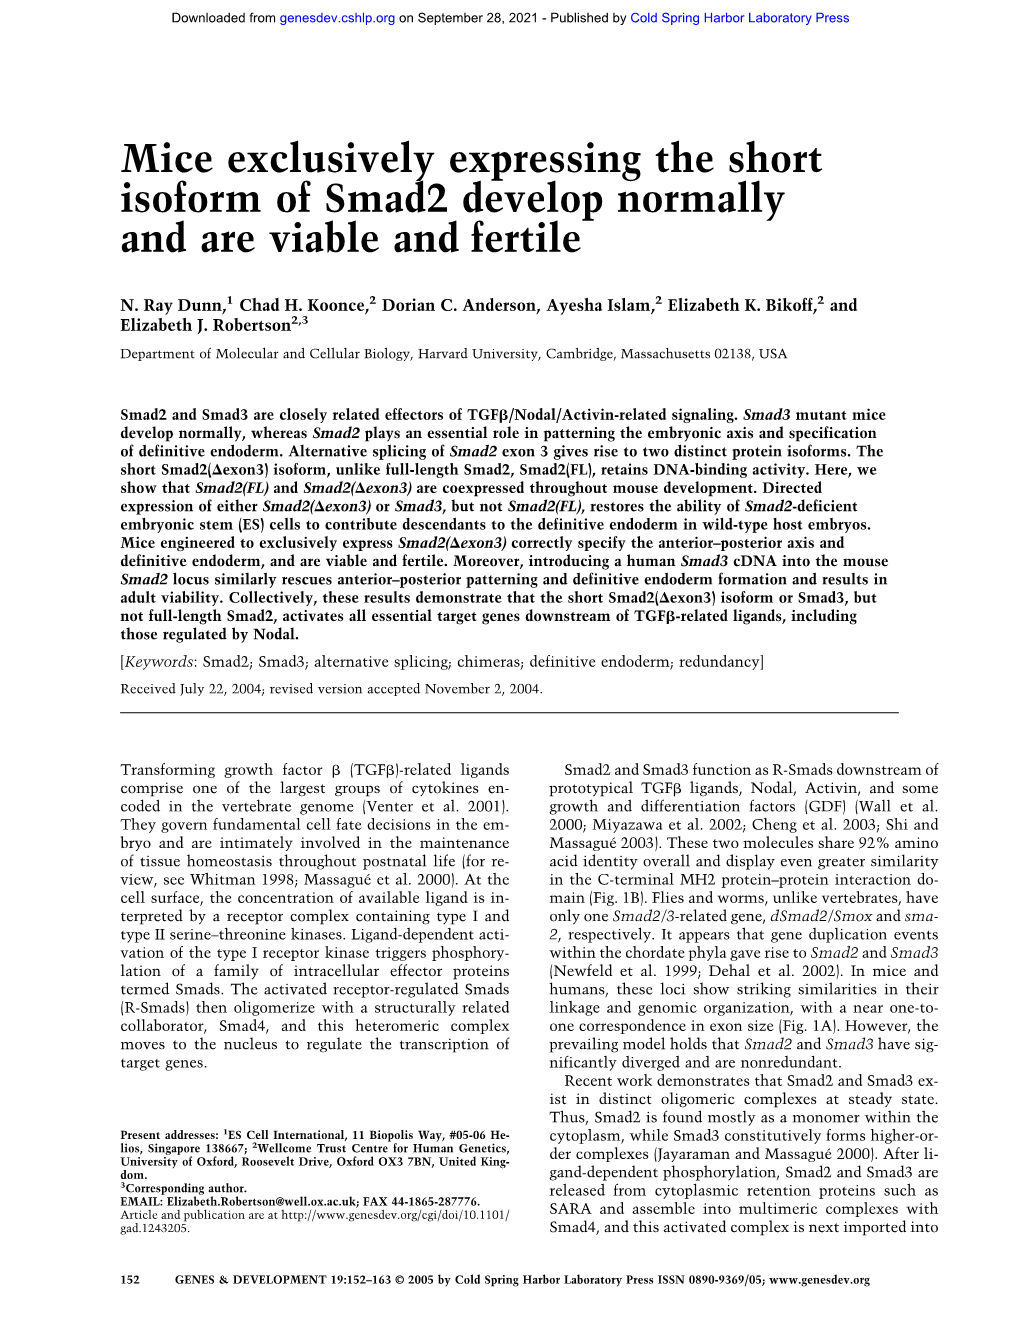 Mice Exclusively Expressing the Short Isoform of Smad2 Develop Normally and Are Viable and Fertile